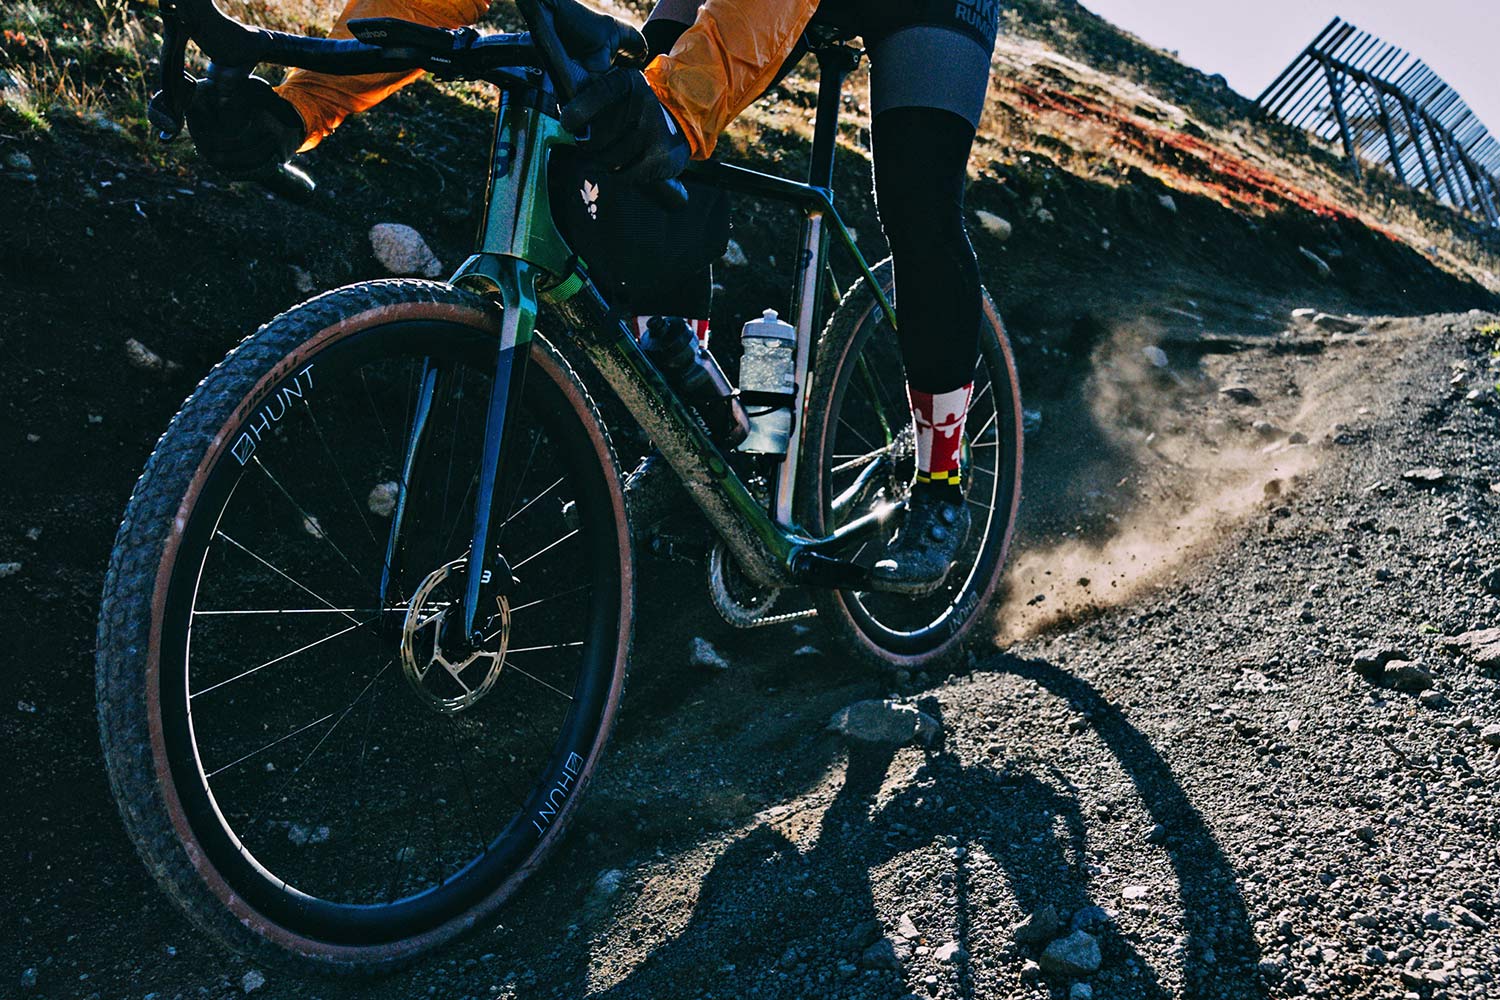 2022 Basso Palta II carbon gravel bike review made-in-Italy, photo by Francesco Bonato, fast & loose